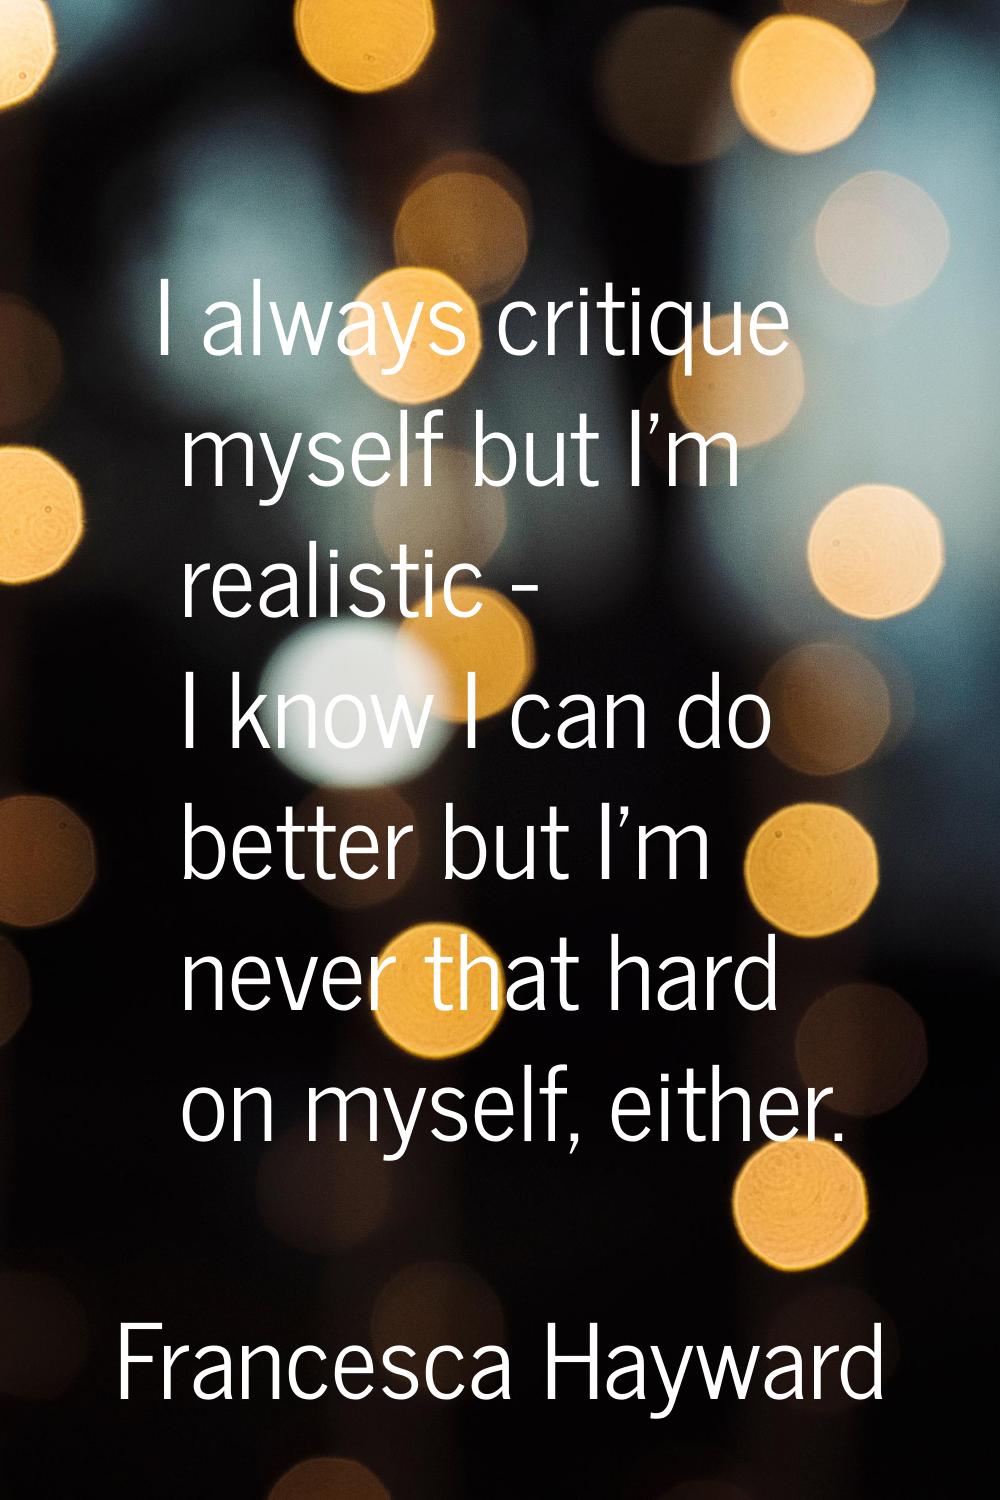 I always critique myself but I'm realistic - I know I can do better but I'm never that hard on myse